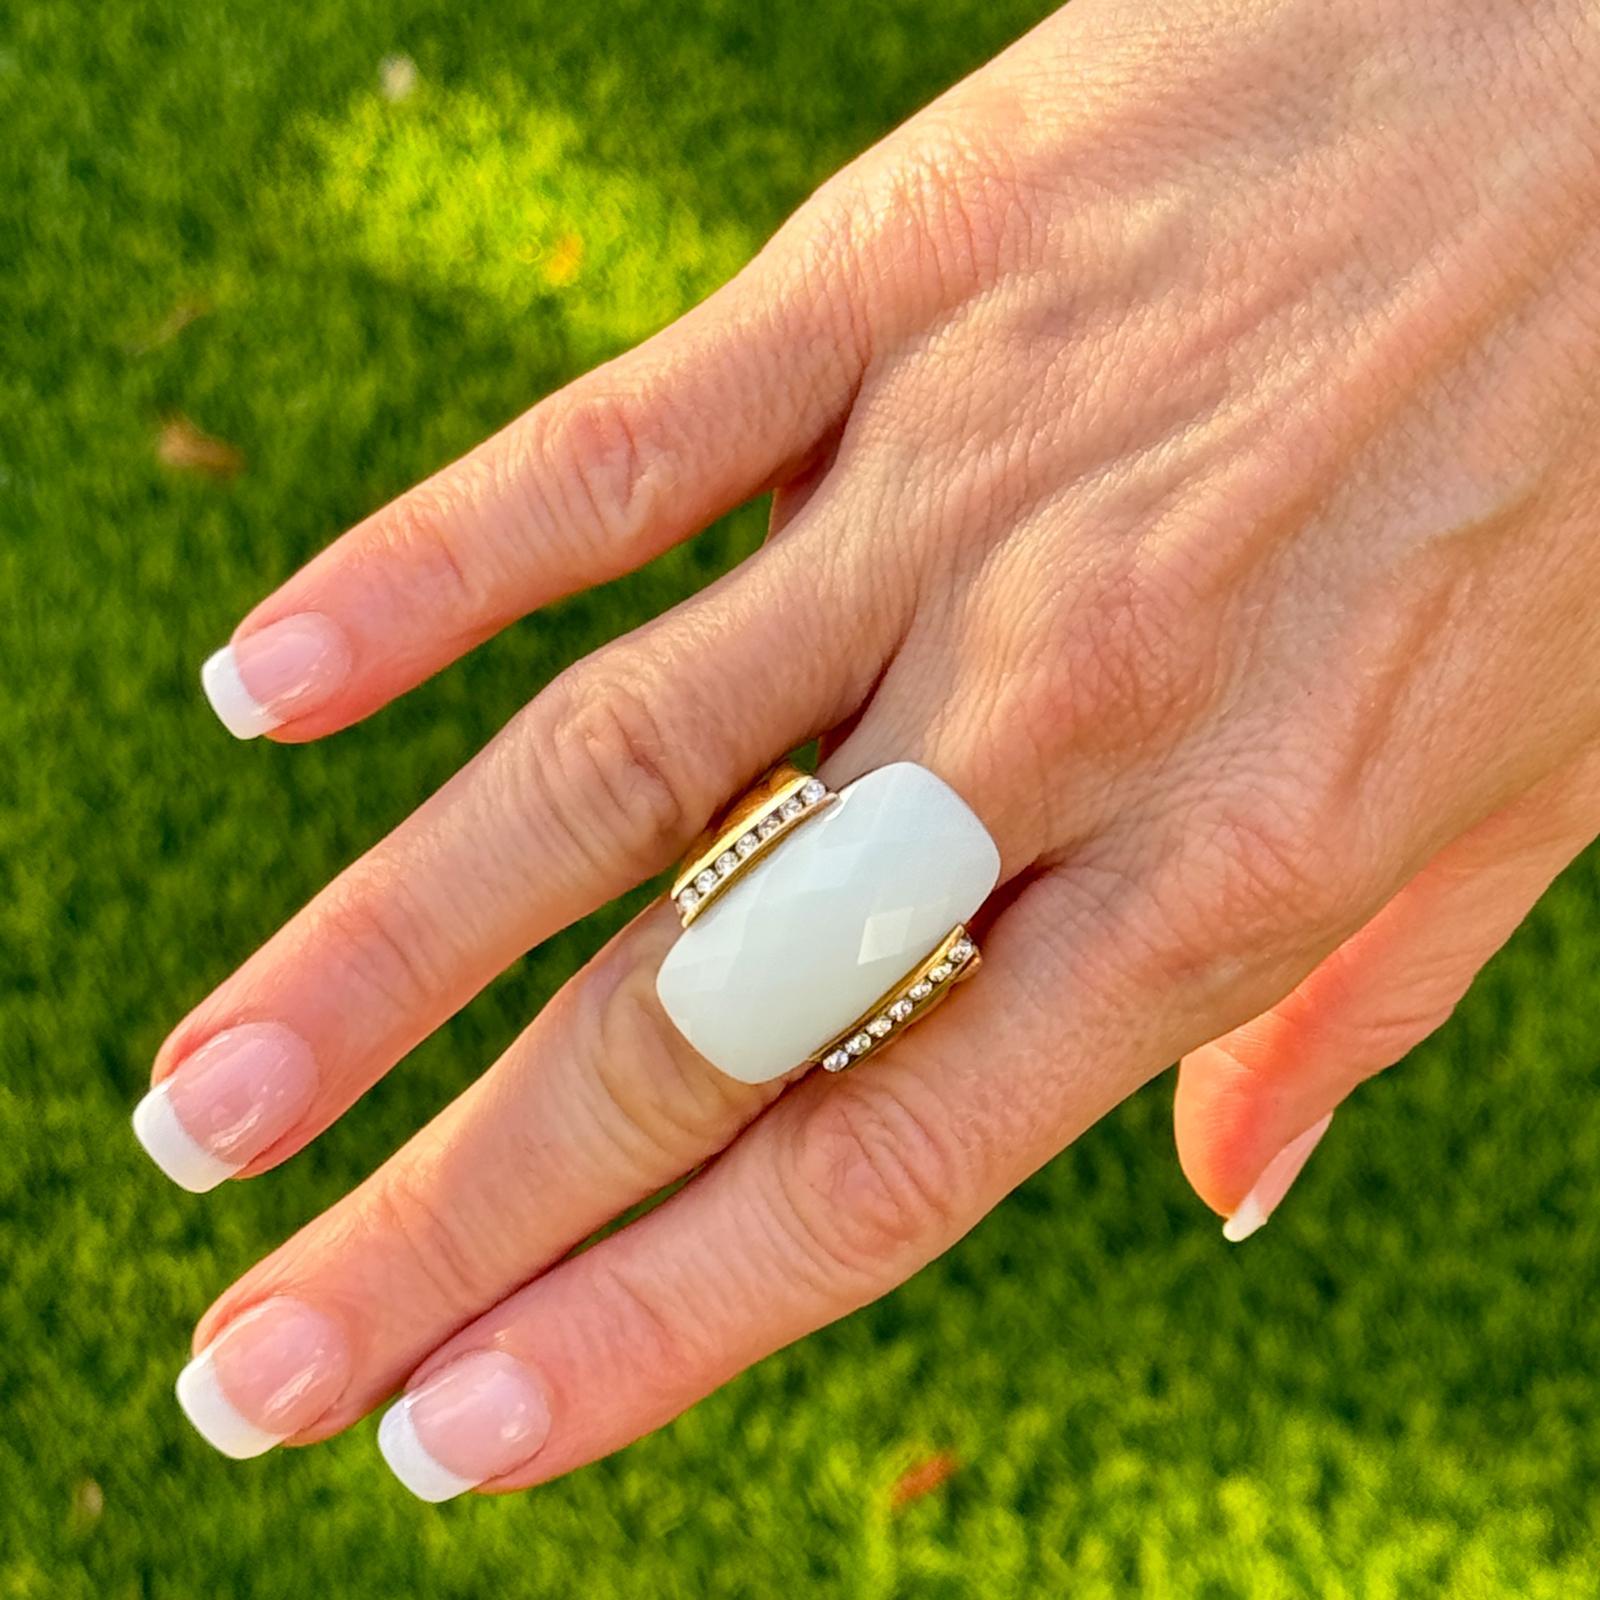 David Yurman white agate diamond cocktail ring crafted in 18 karat yellow gold. The ring features a faceted white agate gemstone with 14 round brilliant cut diamond accents. The diamonds weigh approximately .50 CTW and are graded G-H color and SI1